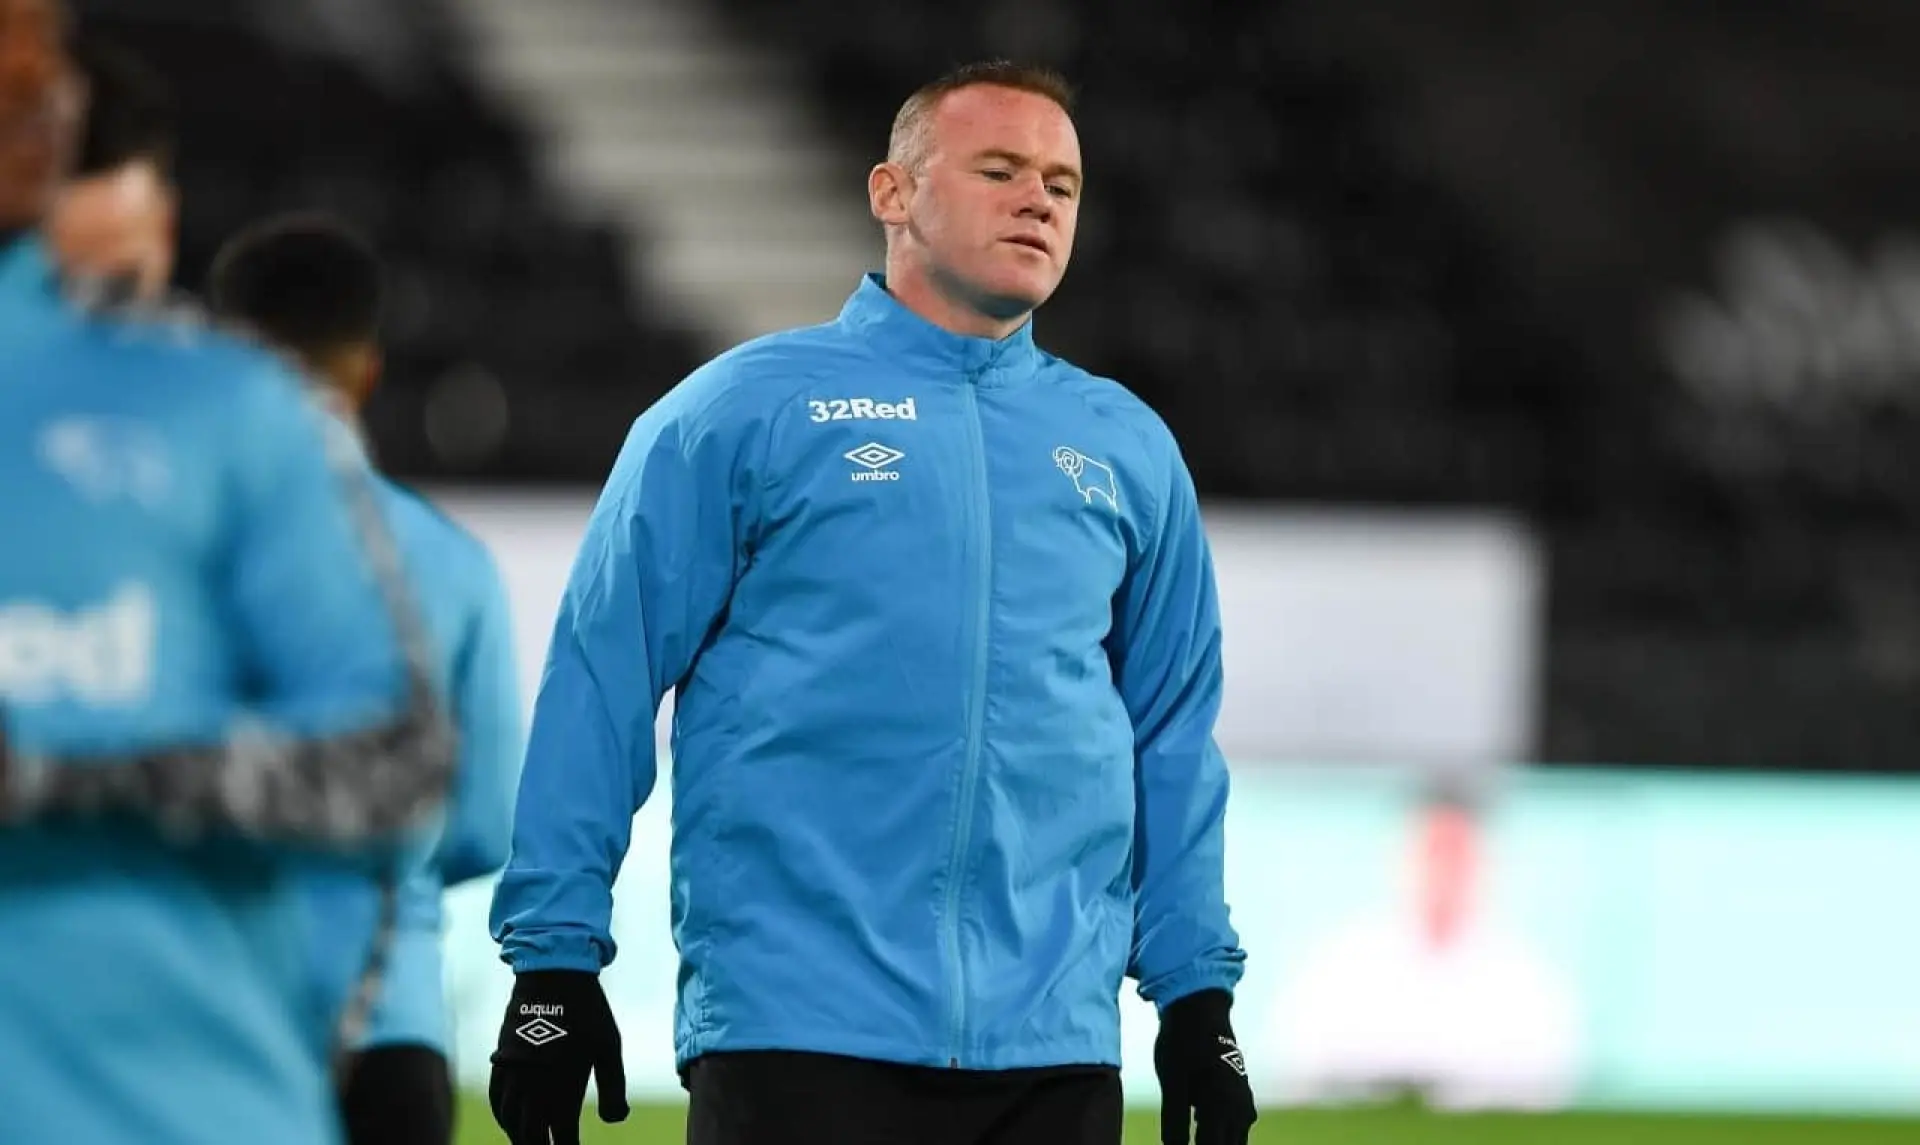 Wayne Rooney - Next Derby County Manager